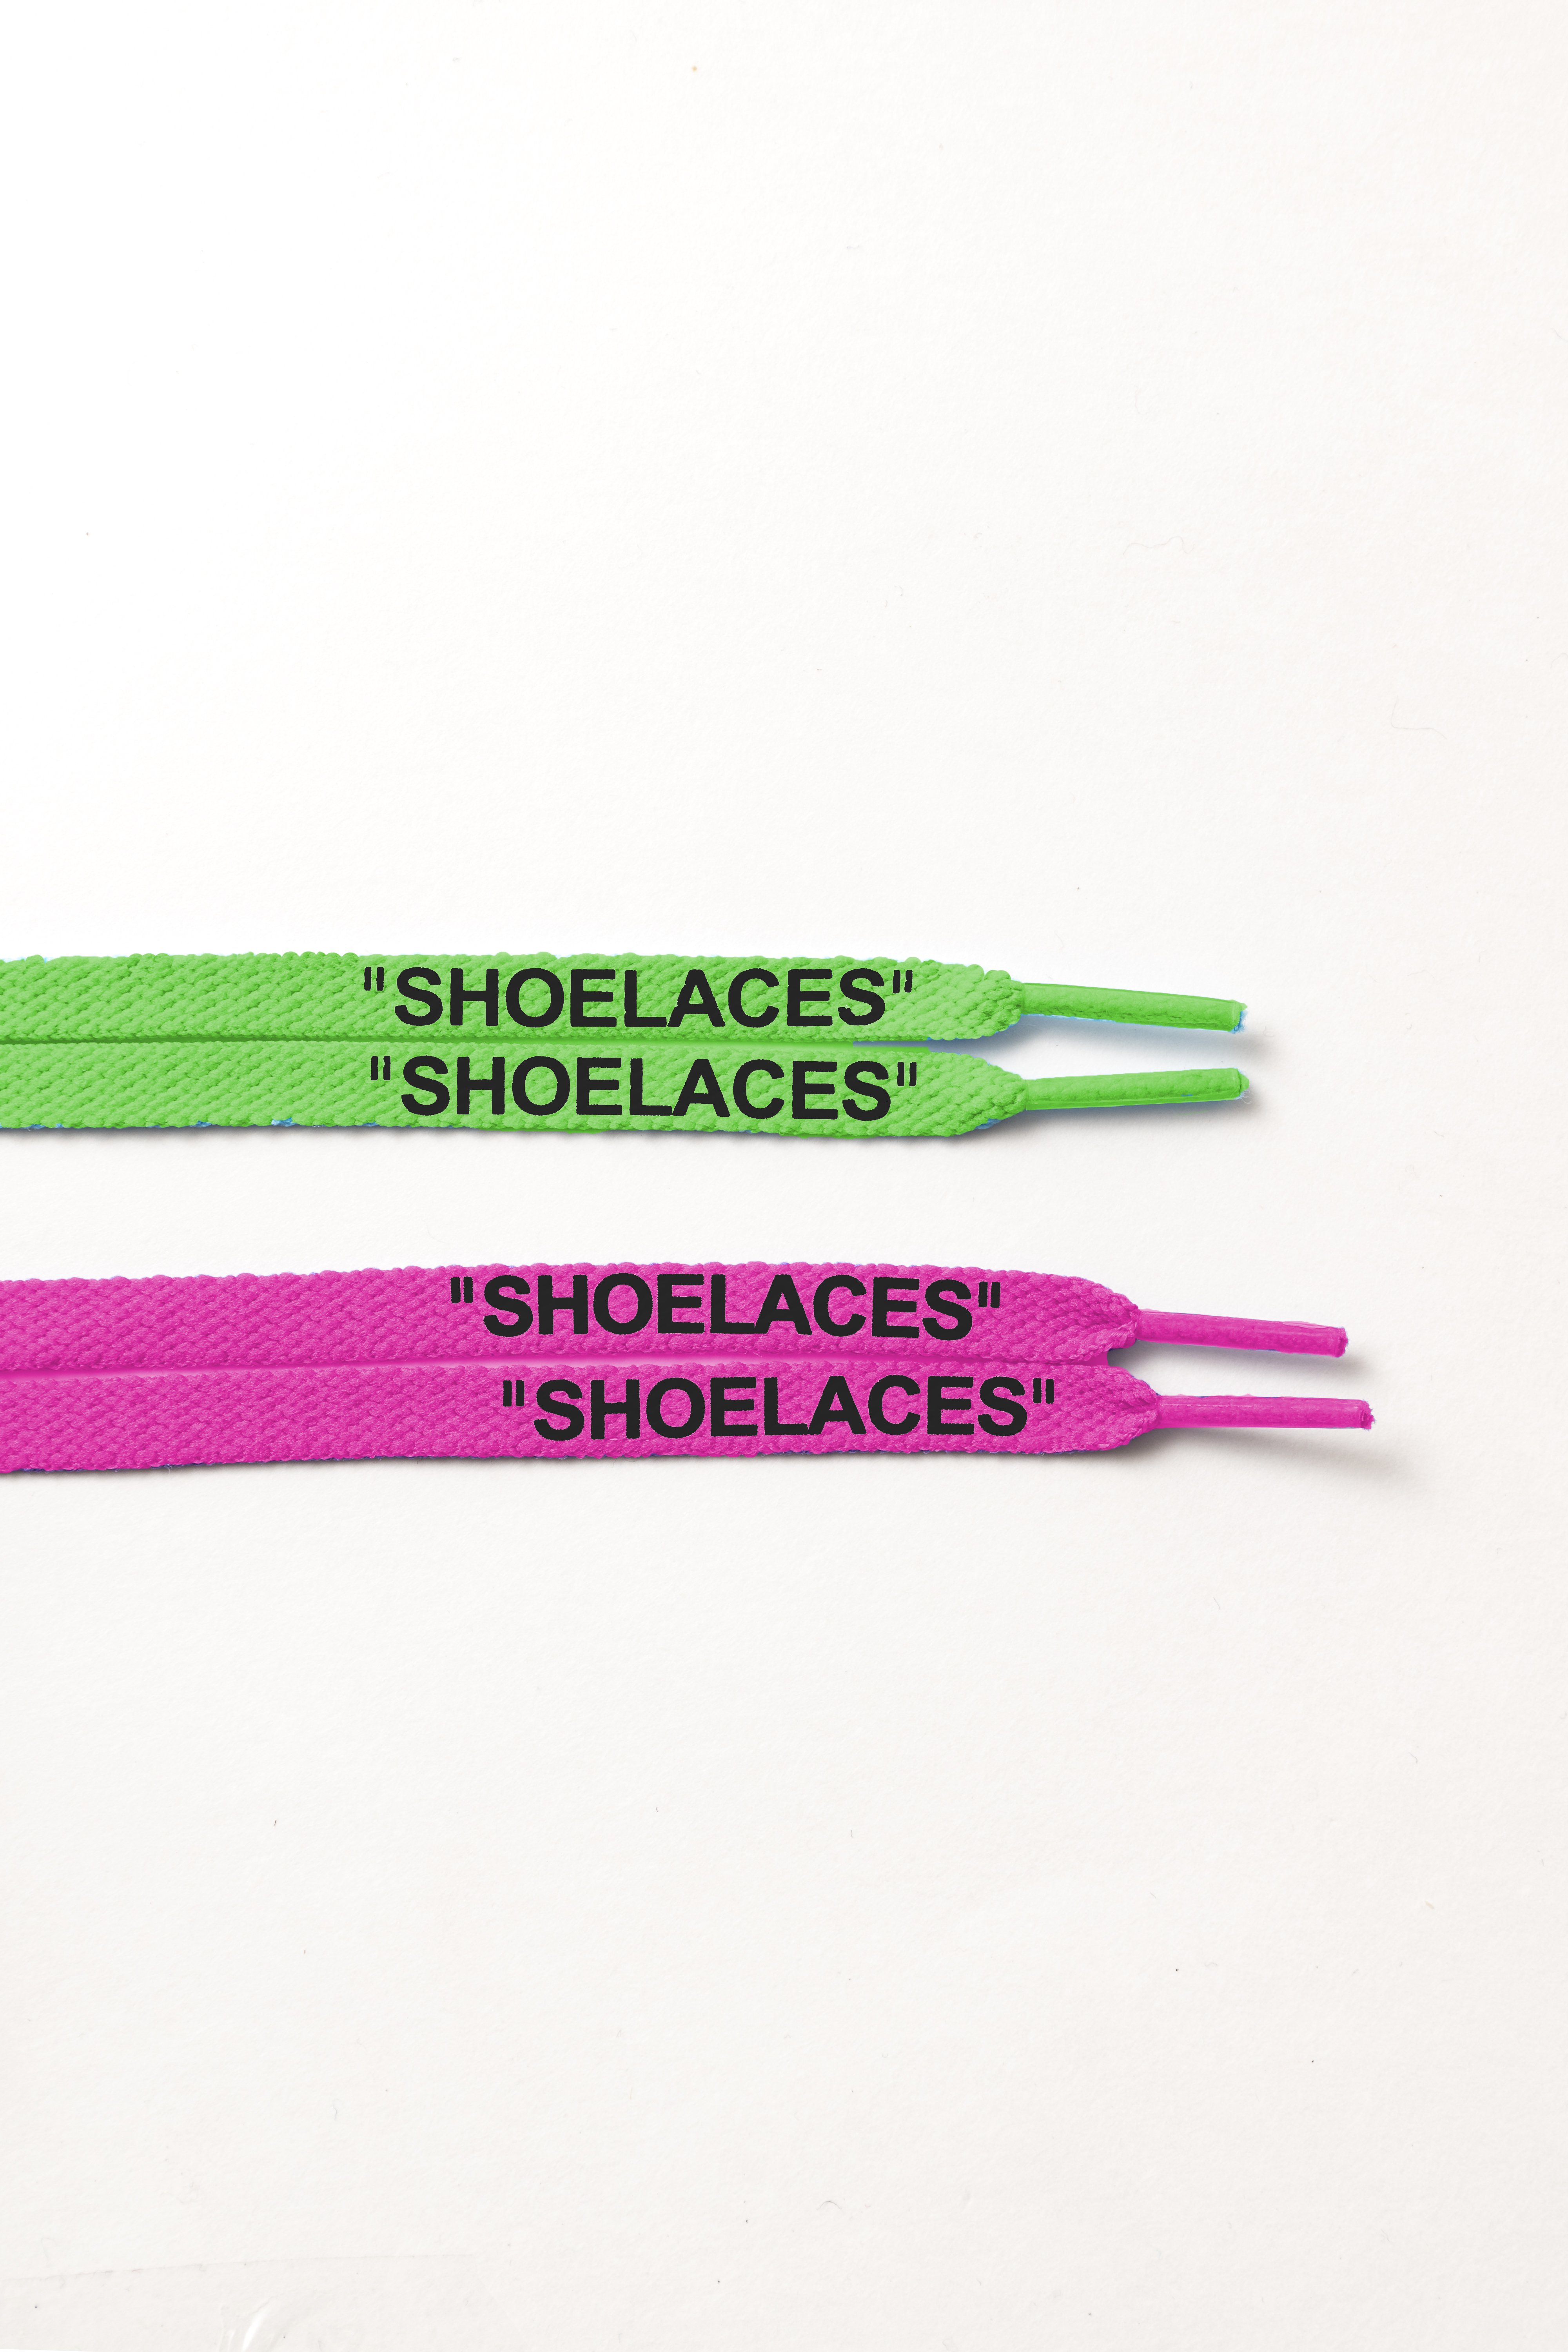 off white shoelaces for sale